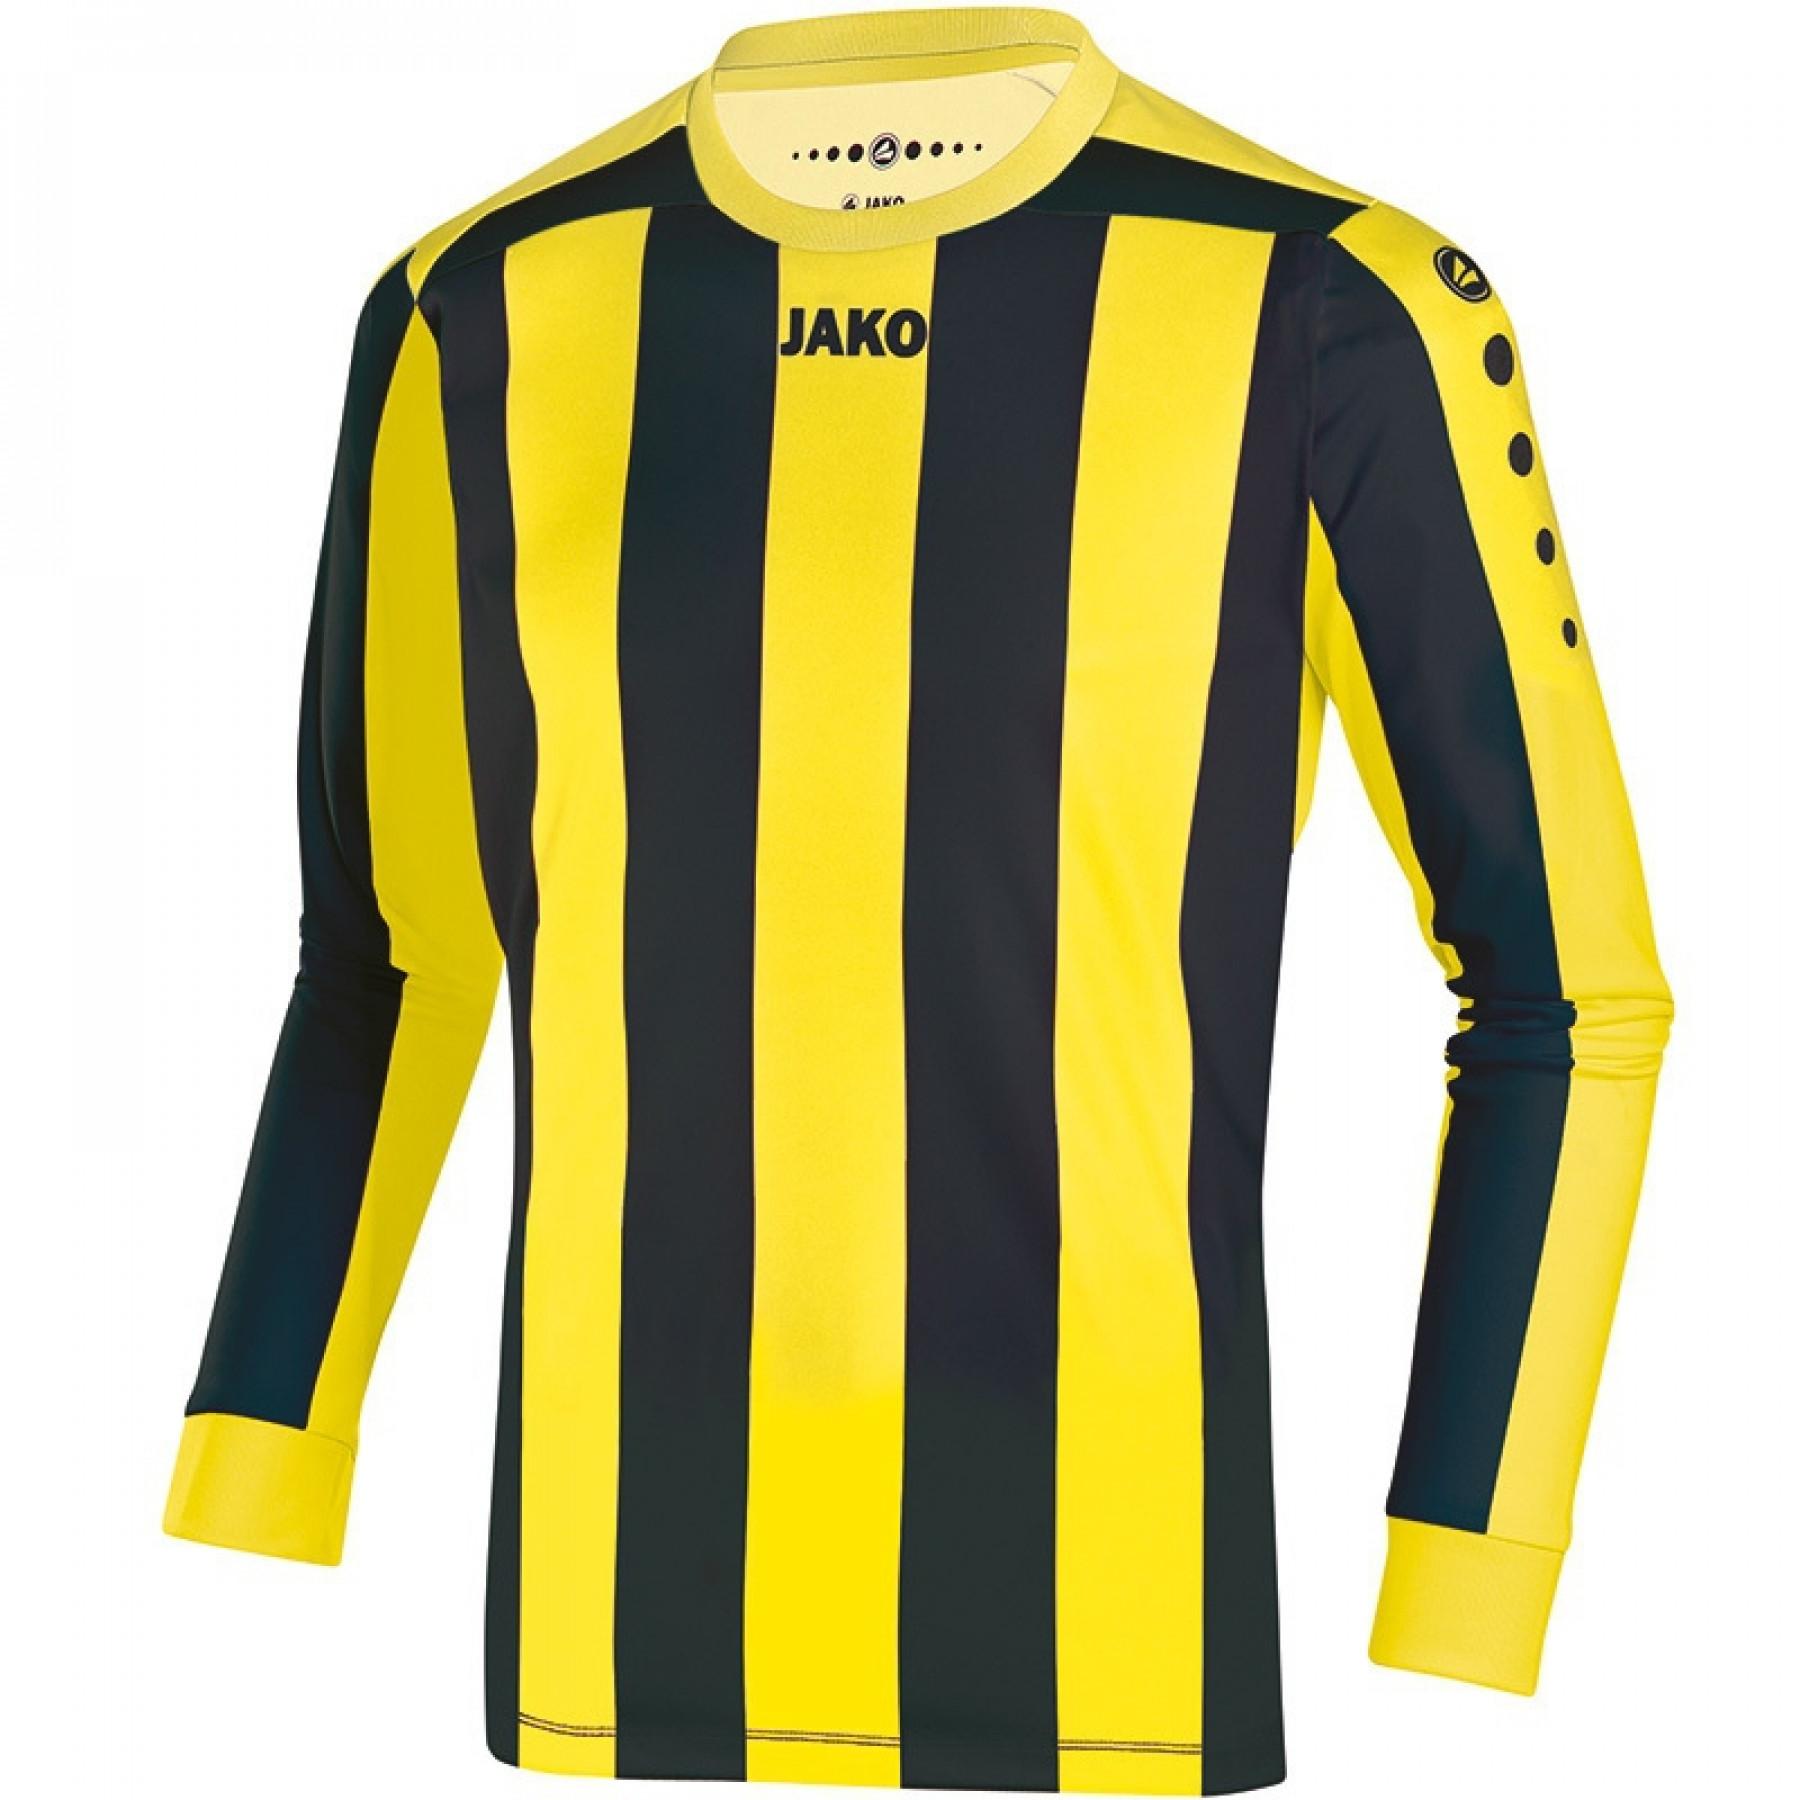 Junior jersey Jako Inter manches longues